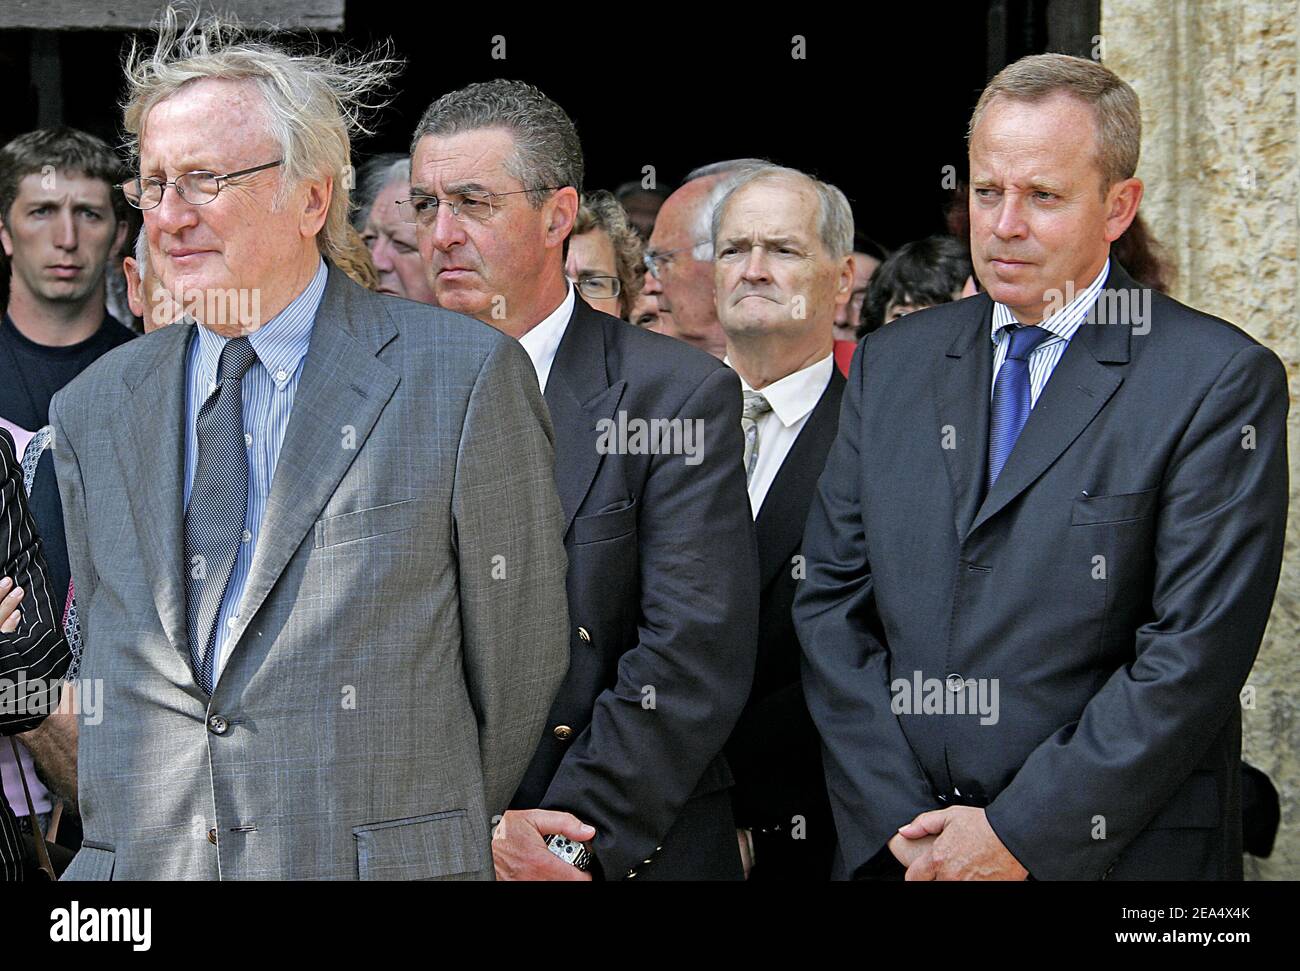 French actor Claude Rich (L) and French Minister of Culture Renaud Donnedieu de Vabres (R) attend the funeral of the late French actor Jacques Dufilho held at the cathedral of Mirande, southwestern France, on August 31, 2005. Dufilho died on August 28 aged 91. Photo by Patrick Bernard/ABACAPRESS.COM. Stock Photo